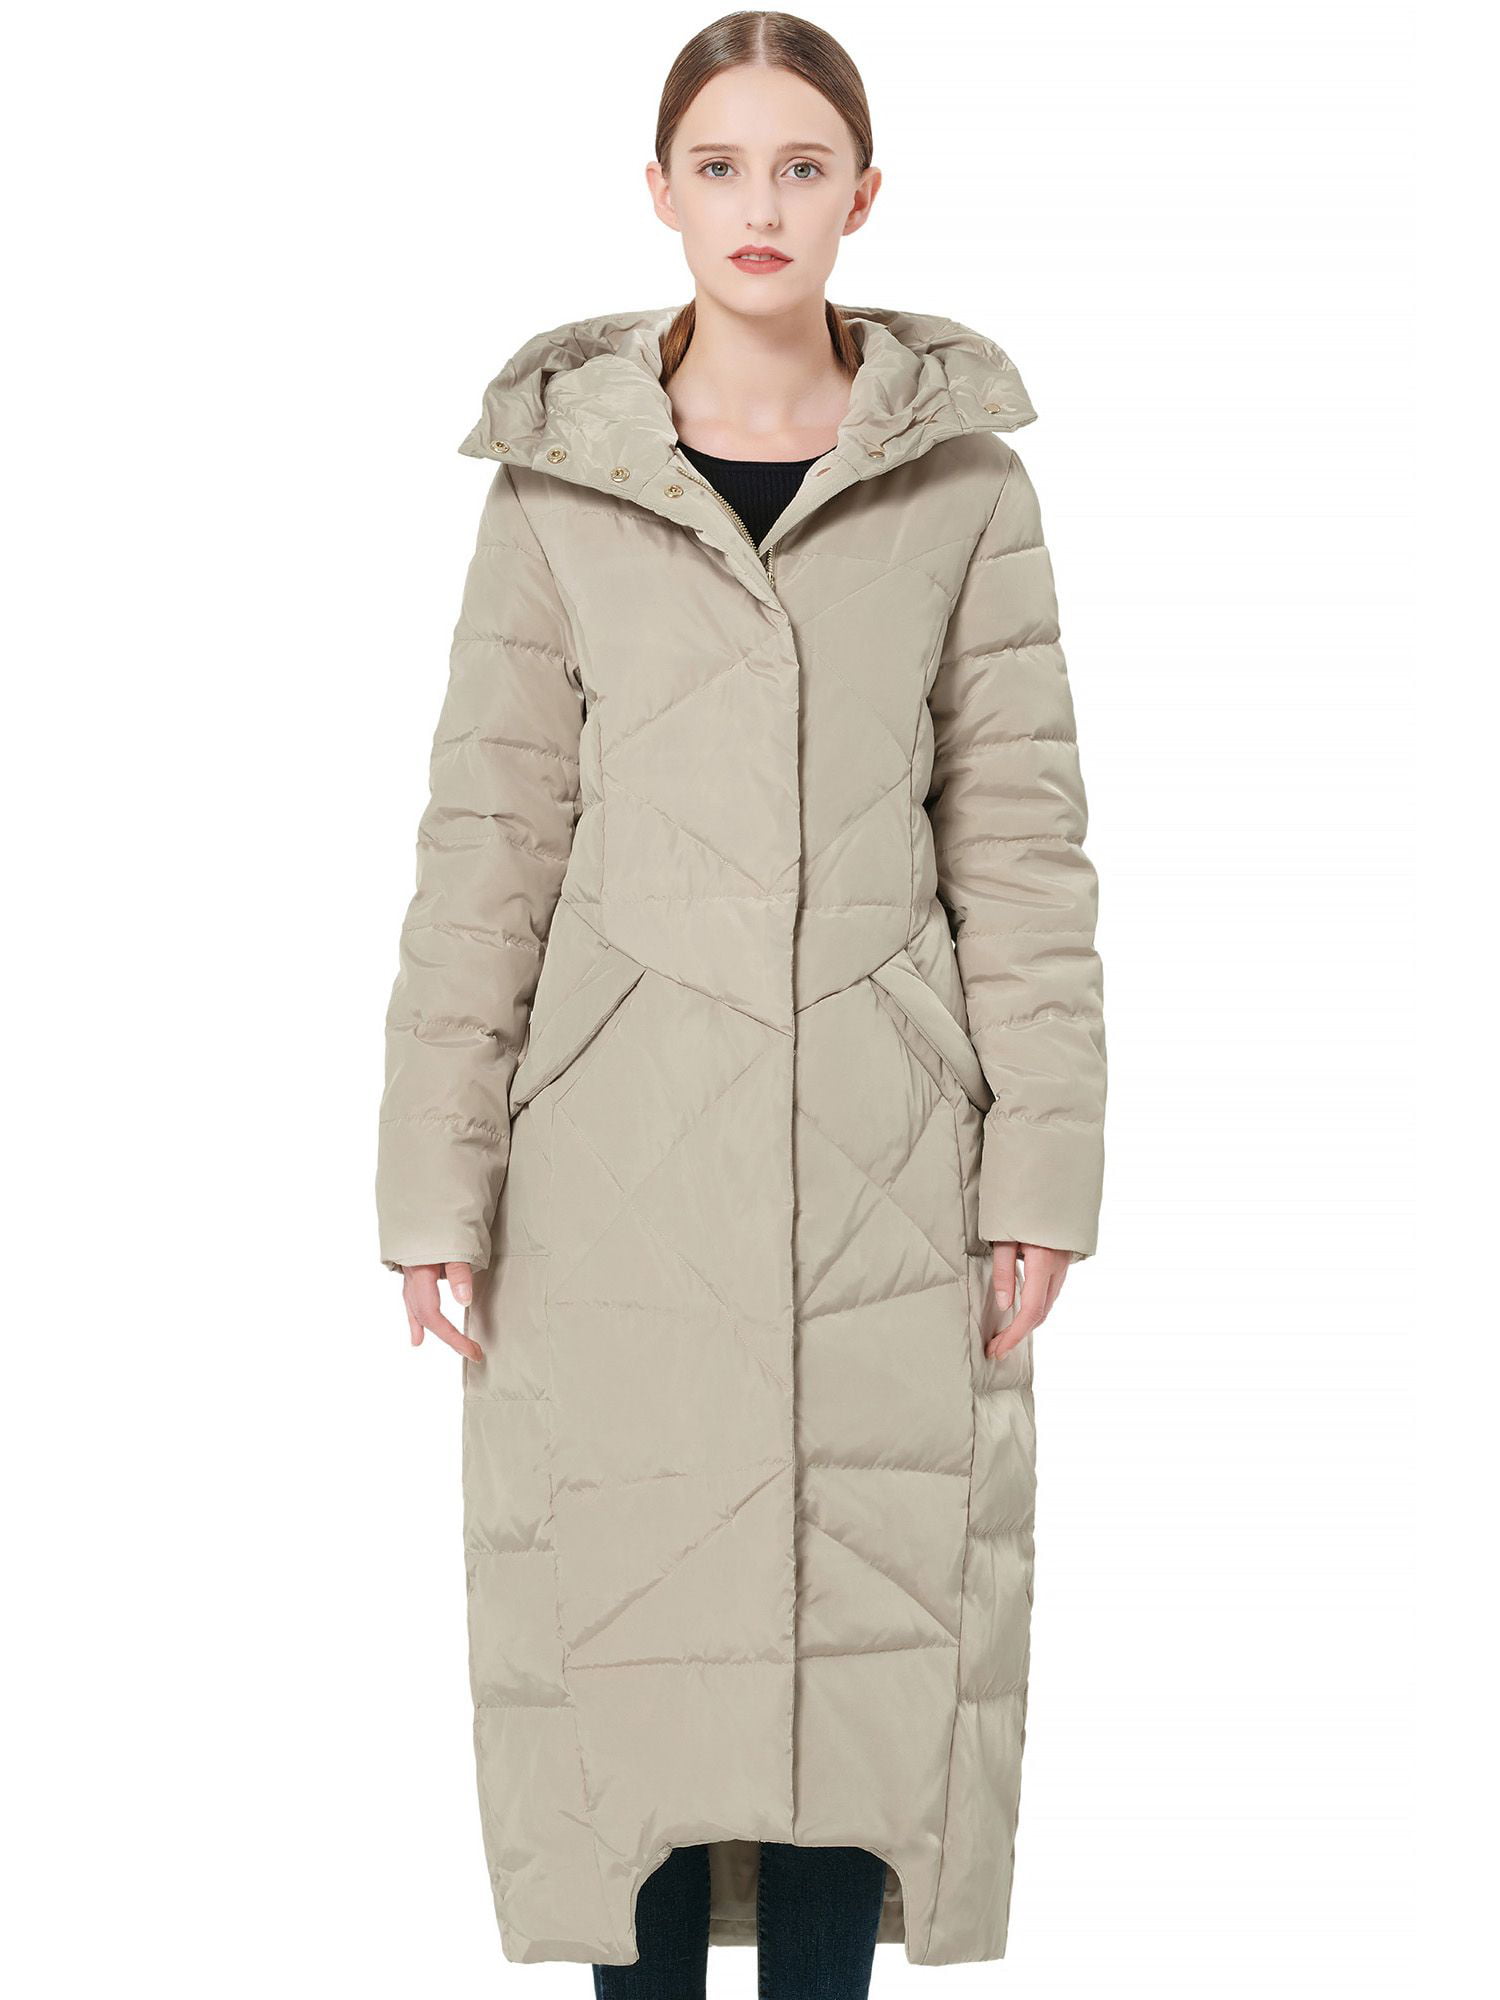 Orolay Women's Packable Down Jacket Winter Maxi Long Jacket with Hood ...